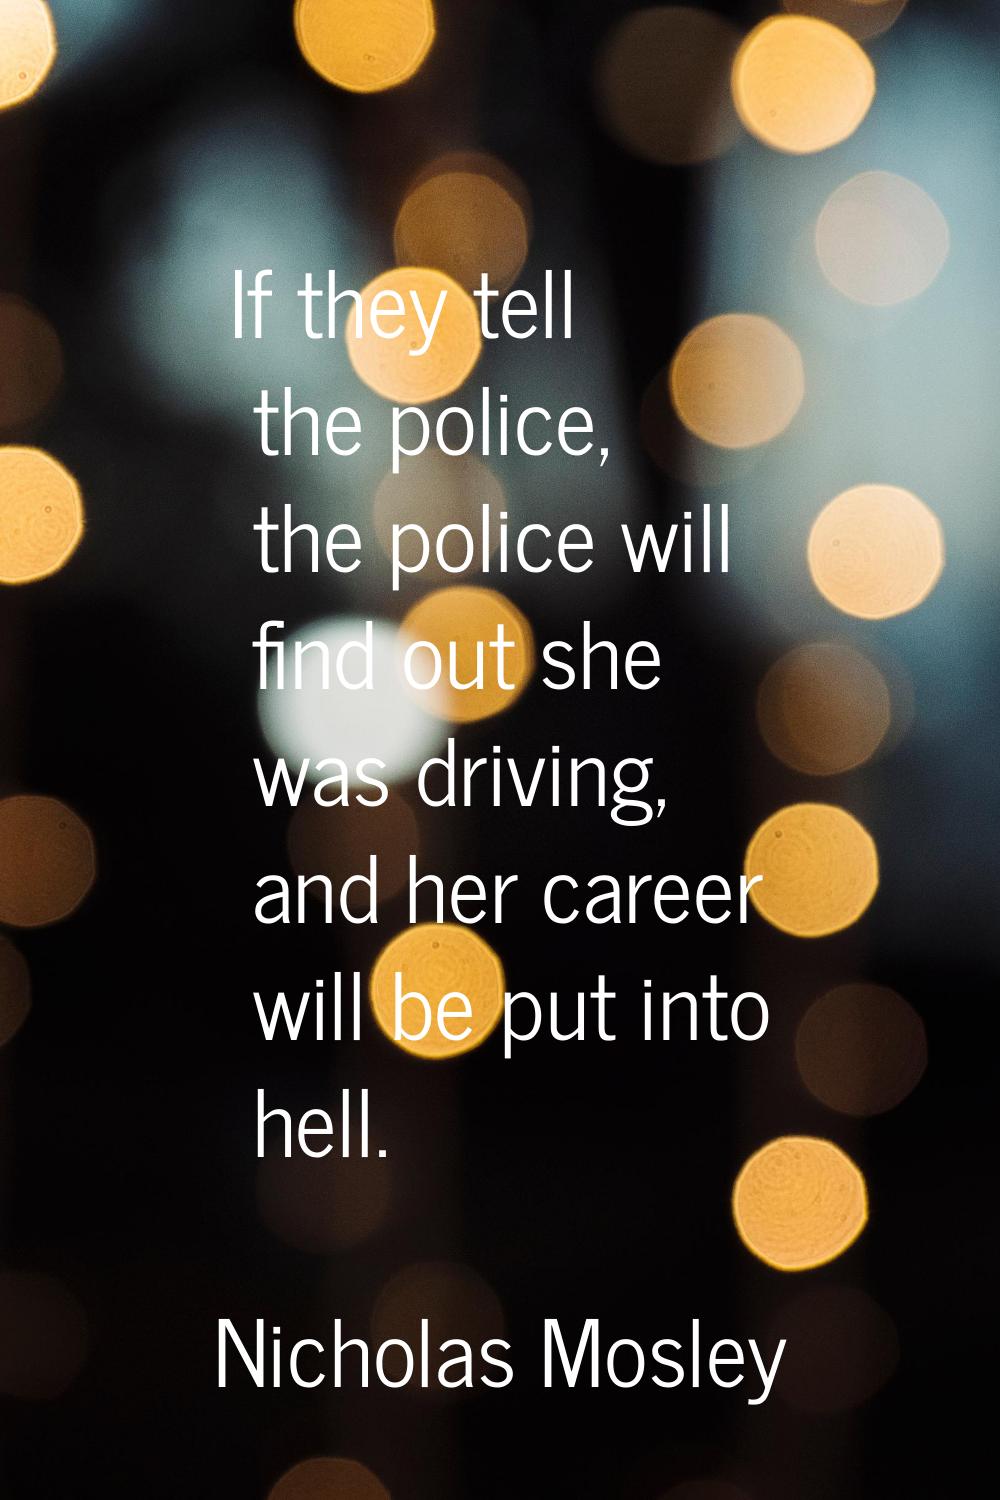 If they tell the police, the police will find out she was driving, and her career will be put into 